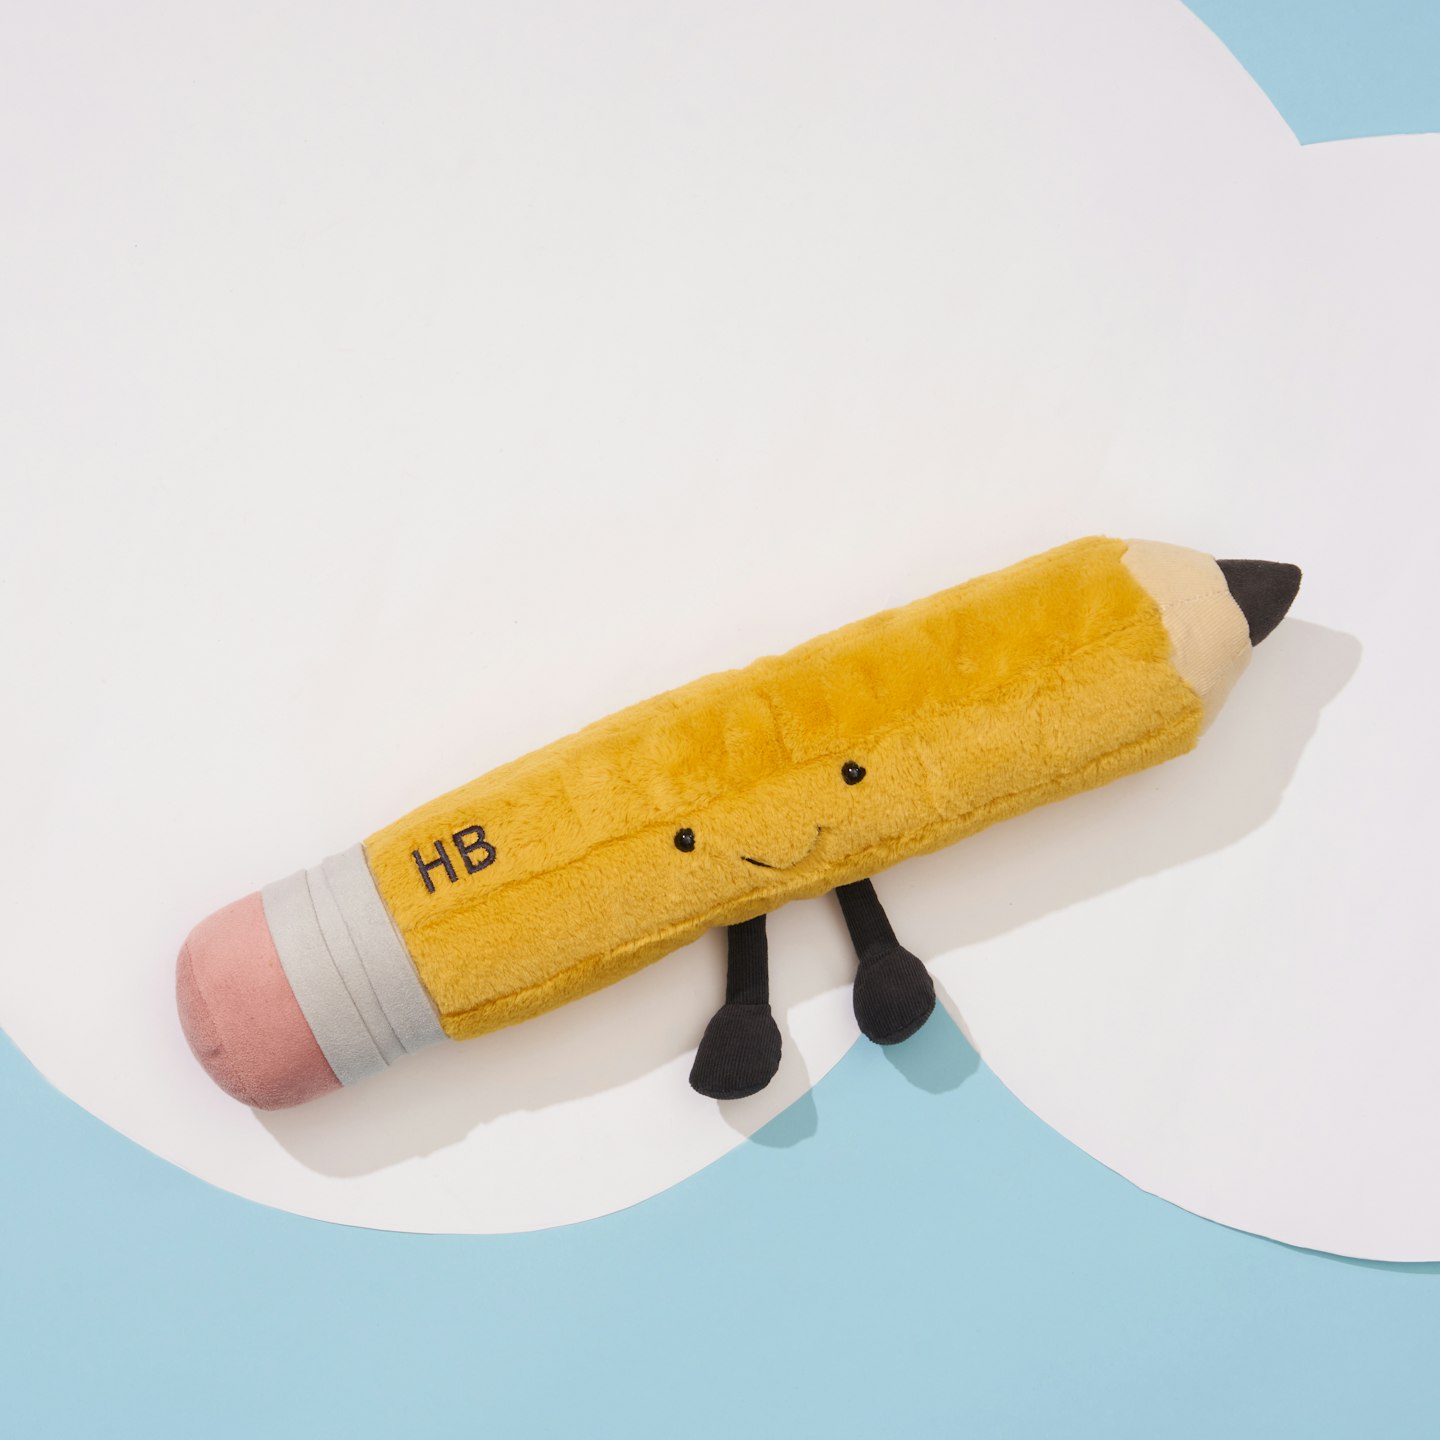 mum to be gifts  New Mum And Baby Gift Guide Smart Stationery Pencil, Jellycat 24